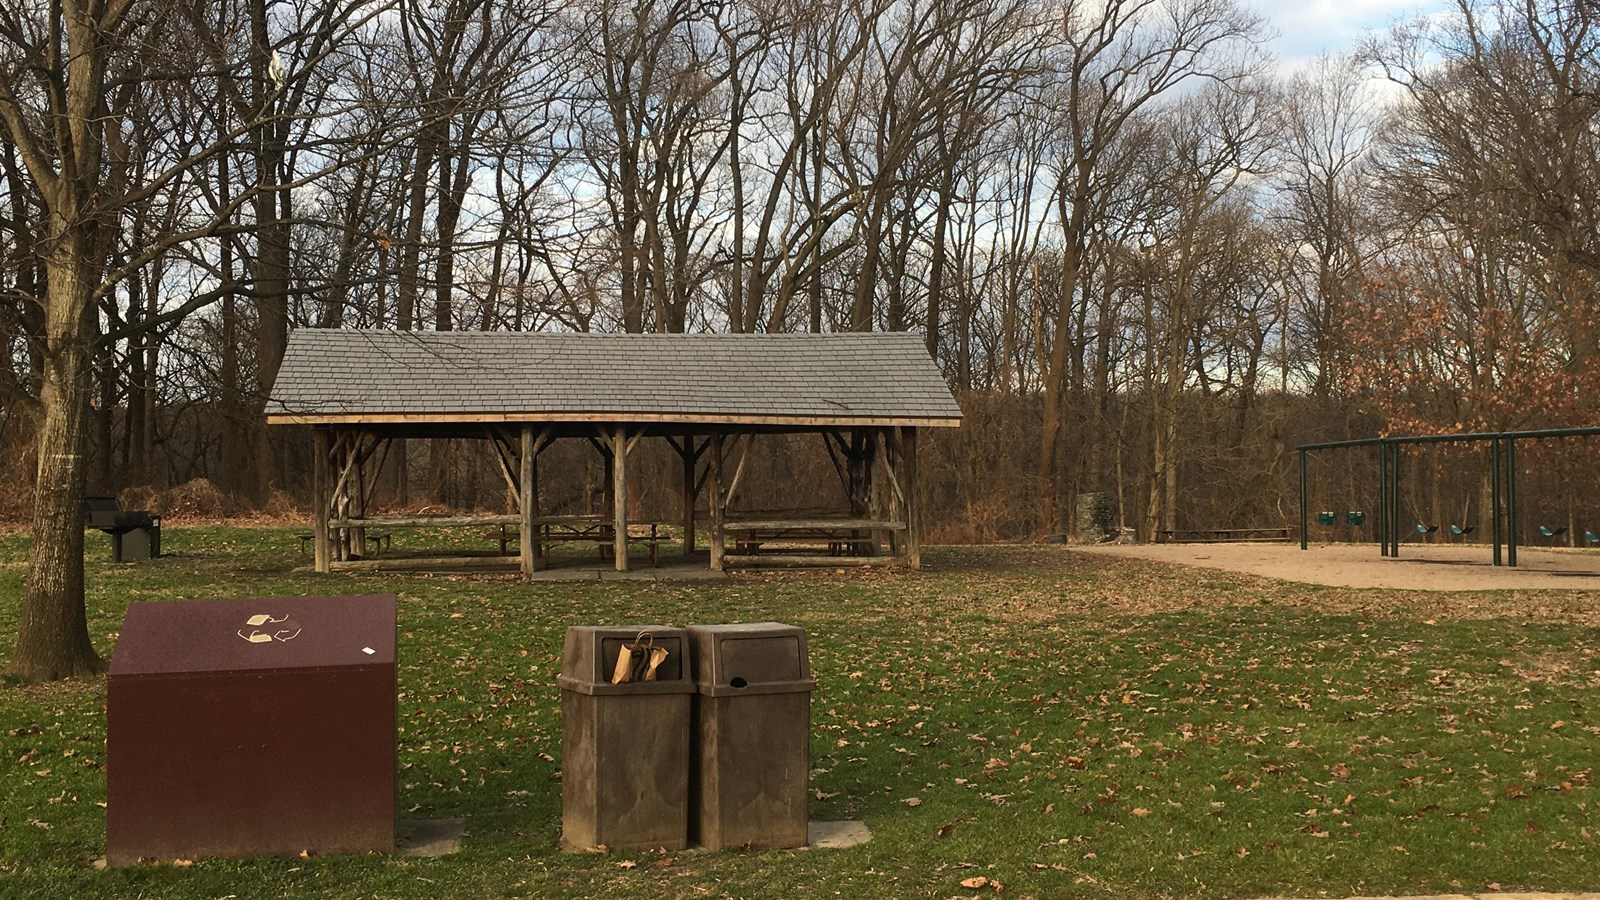 A picnic pavilion, trash cans and playground